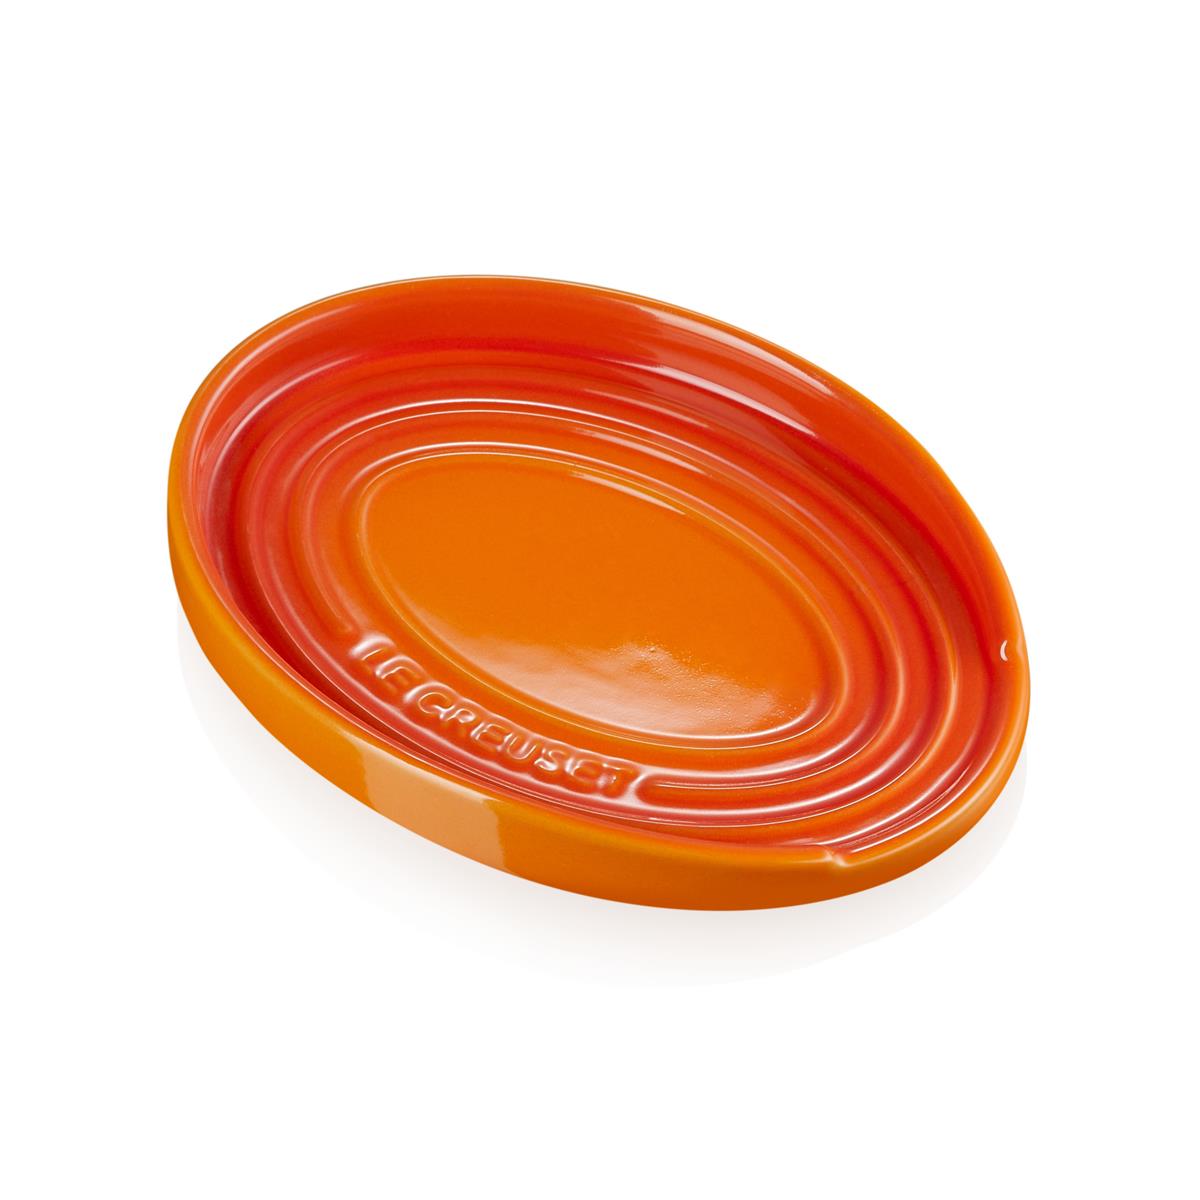 What sizes and colors does the Le Creuset spoon rest come in?